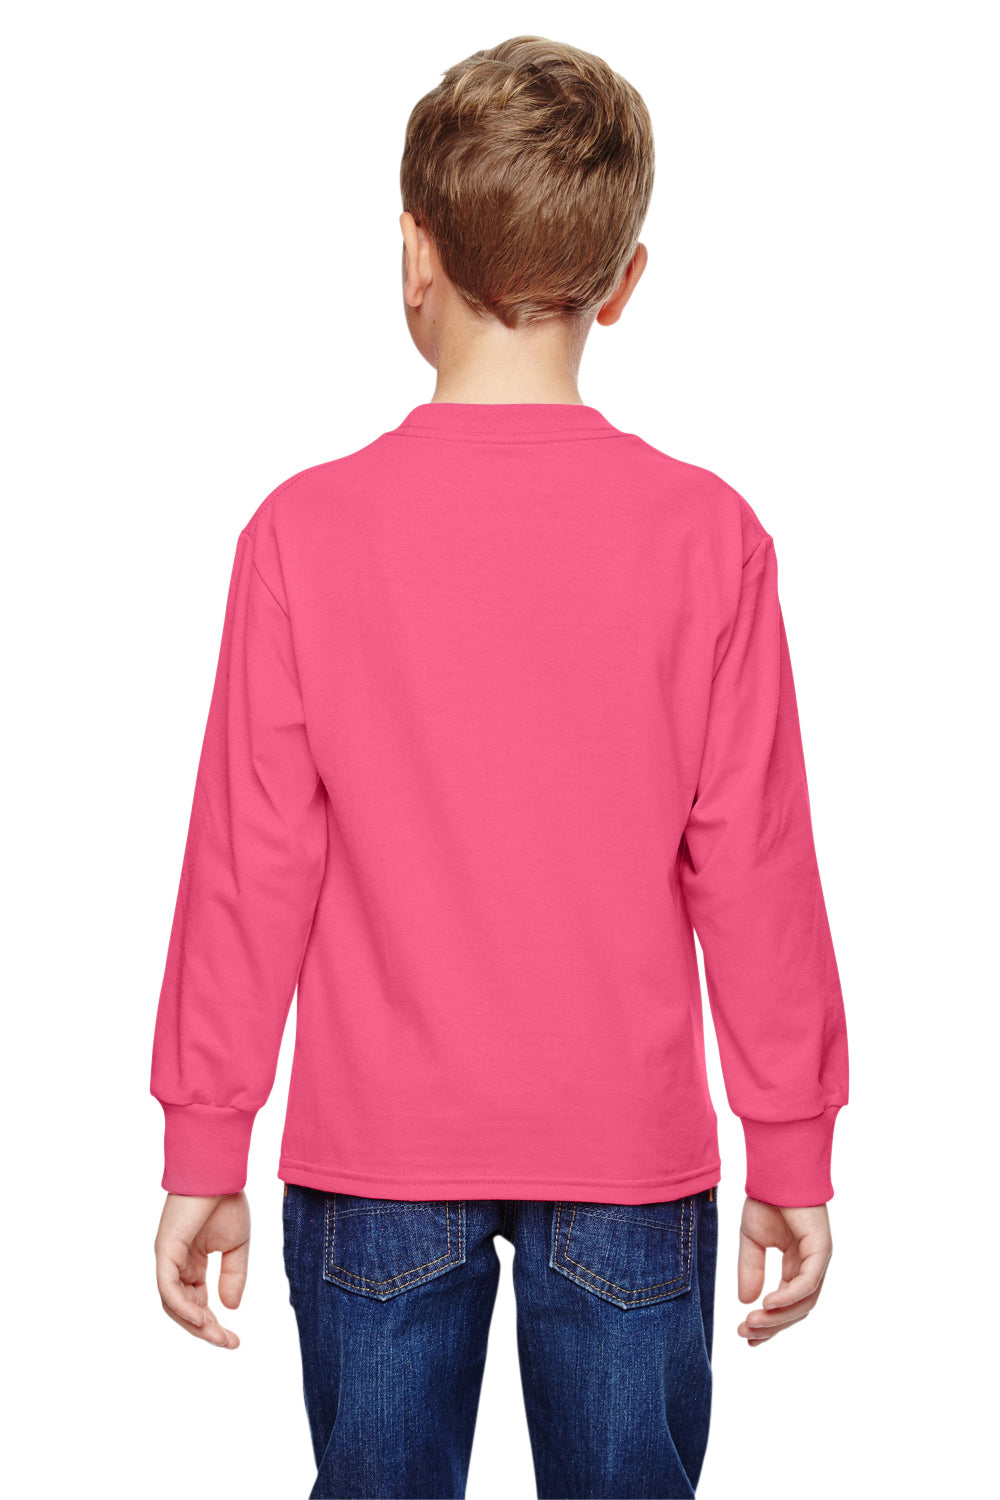 Fruit Of The Loom 4930B Youth HD Jersey Long Sleeve Crewneck T-Shirt Neon Pink Back